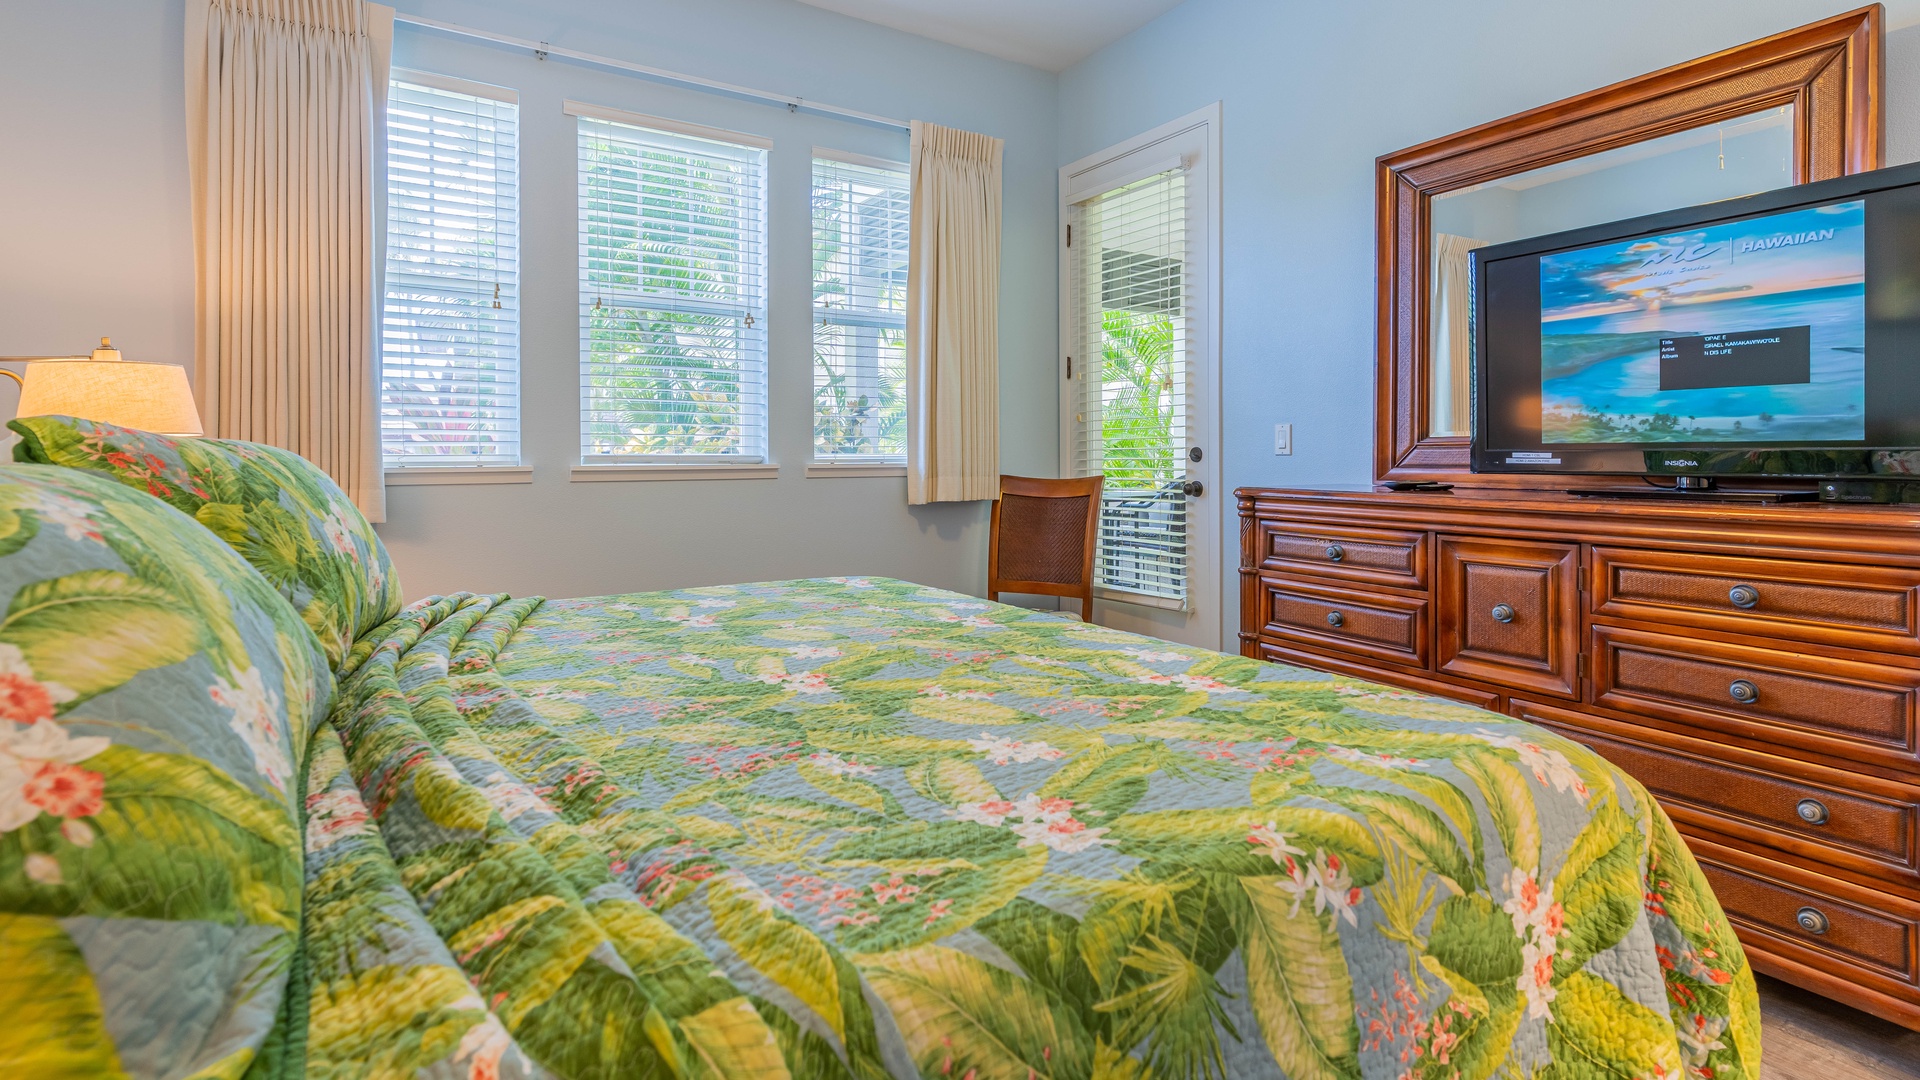 Kapolei Vacation Rentals, Coconut Plantation 1214-2 Aloha Lagoons - The primary guest bedroom with floral prints and a large dresser.